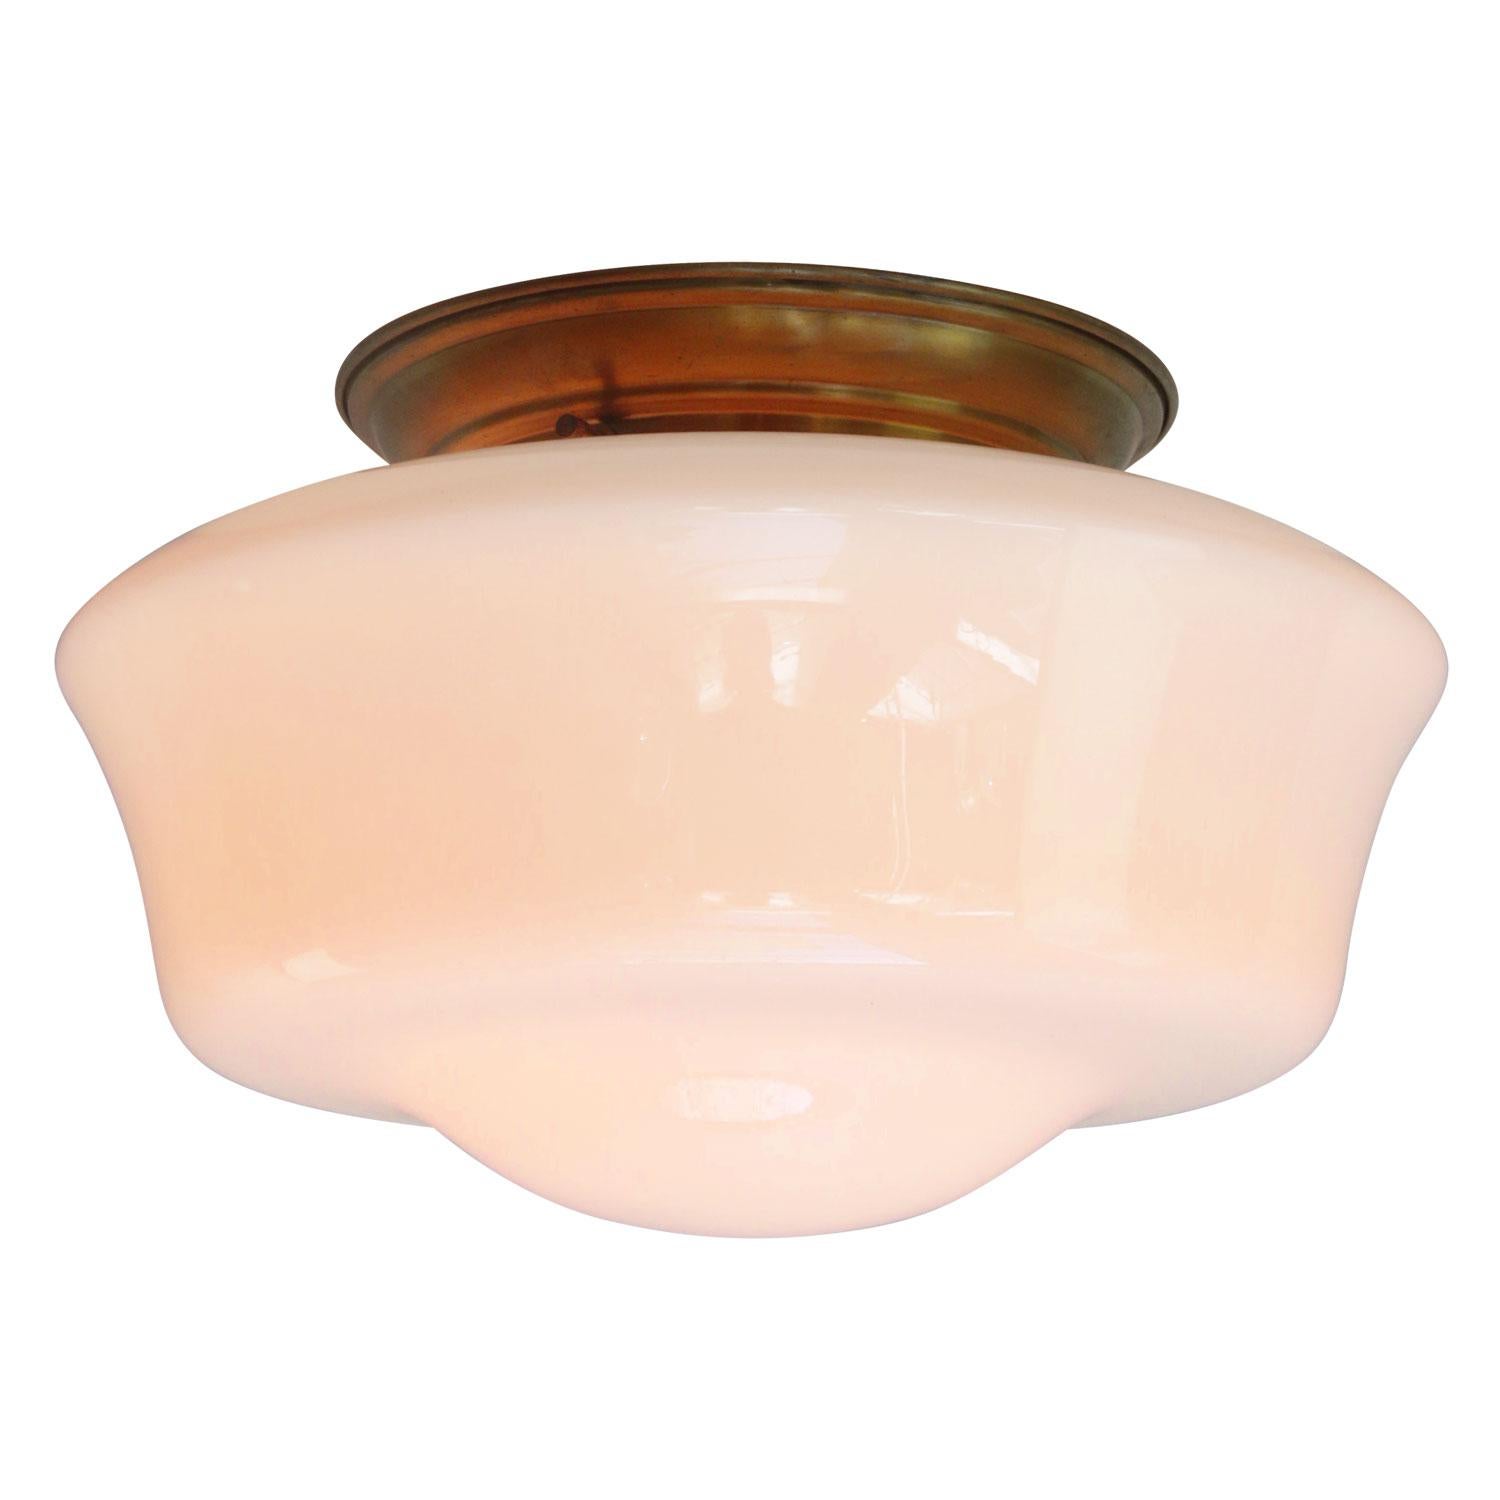 Opaline glass ceiling lamp, flush mount.
Brass base

Weight: 2.30 kg / 5.1 lb

Priced per individual item. All lamps have been made suitable by international standards for incandescent light bulbs, energy-efficient and LED bulbs. E26/E27 bulb